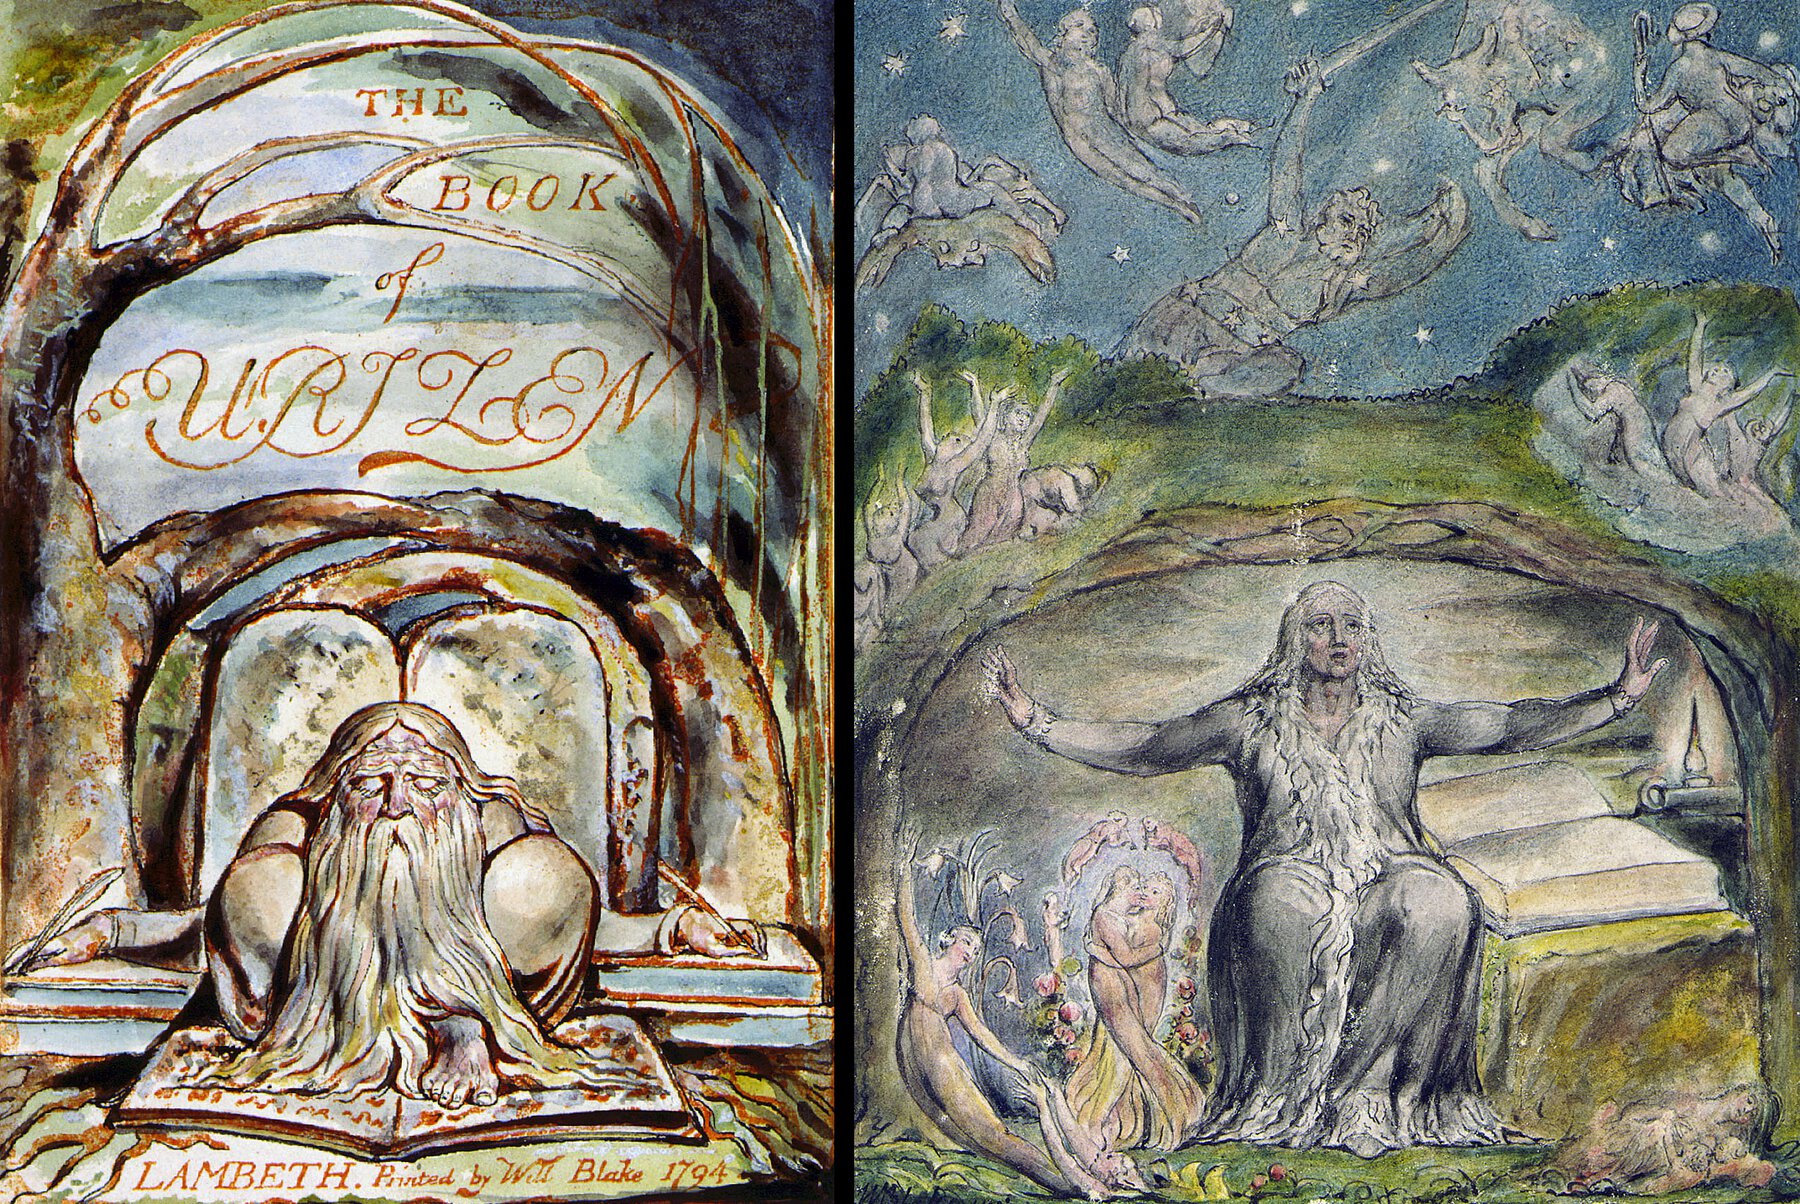 Left: Man with long beard and hair sitting cross-legged over manuscript book, writing with both hands. Right: Man with long beard and hair, sitting with arms extended, surrounded by various apparitions.